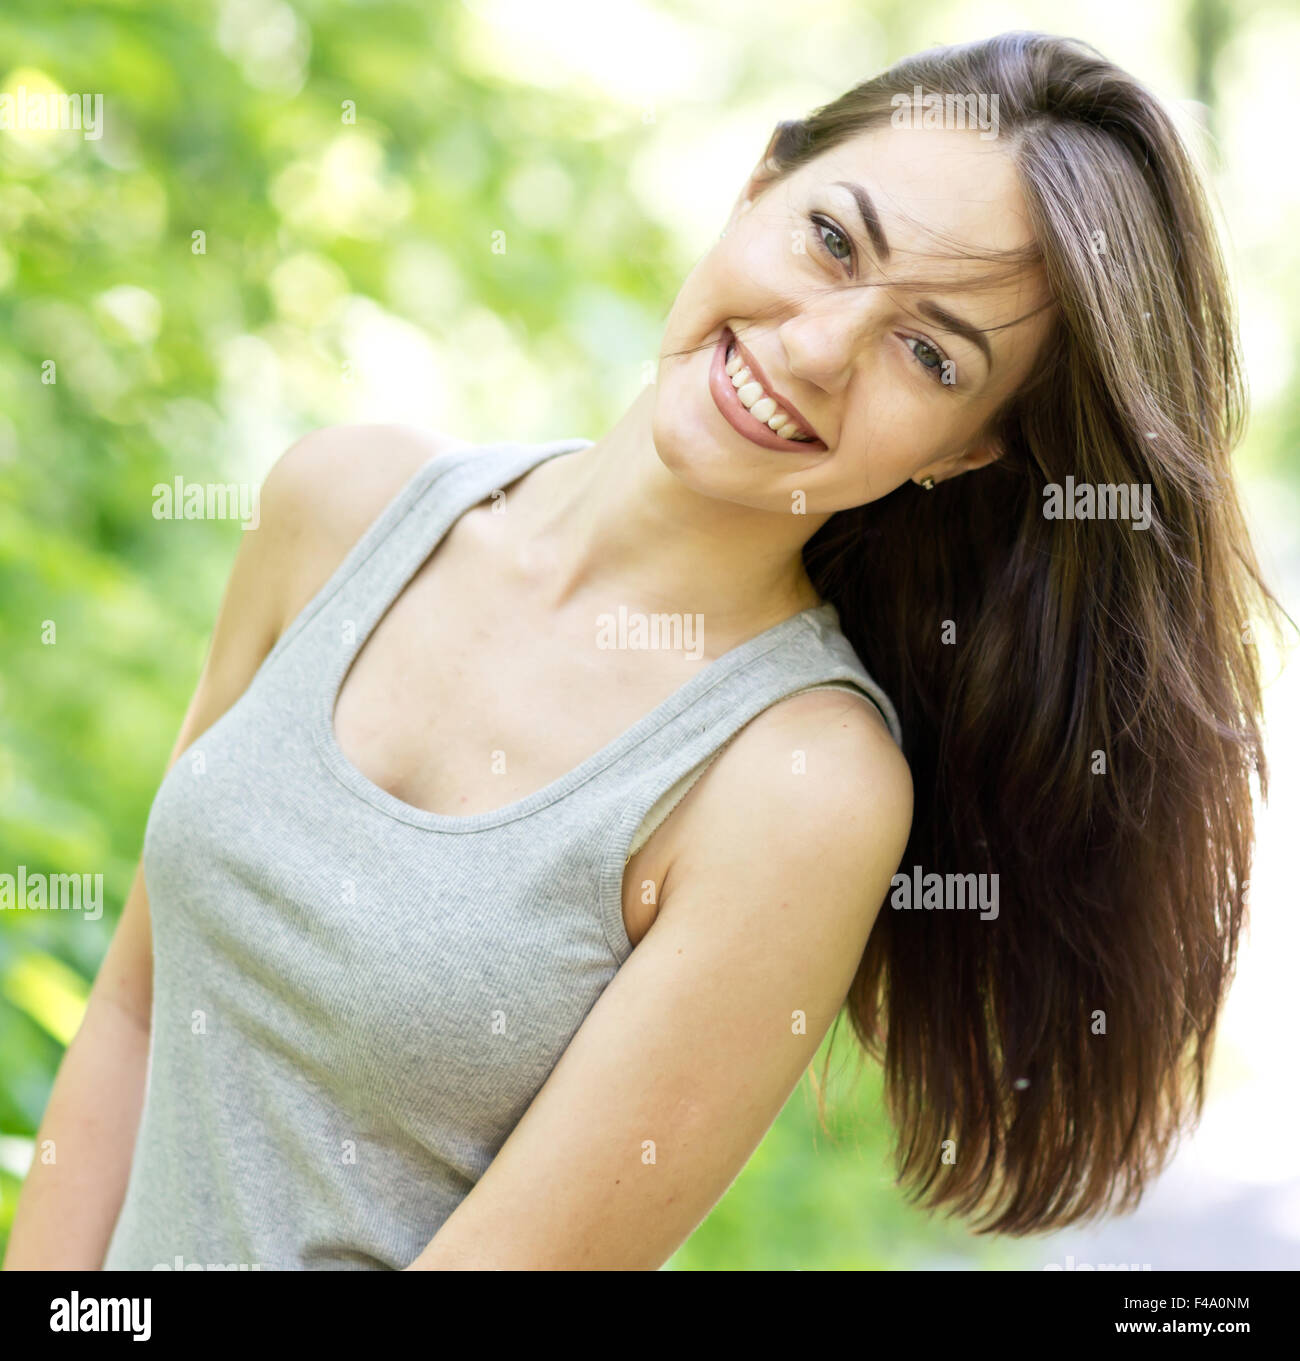 laughing woman Stock Photo